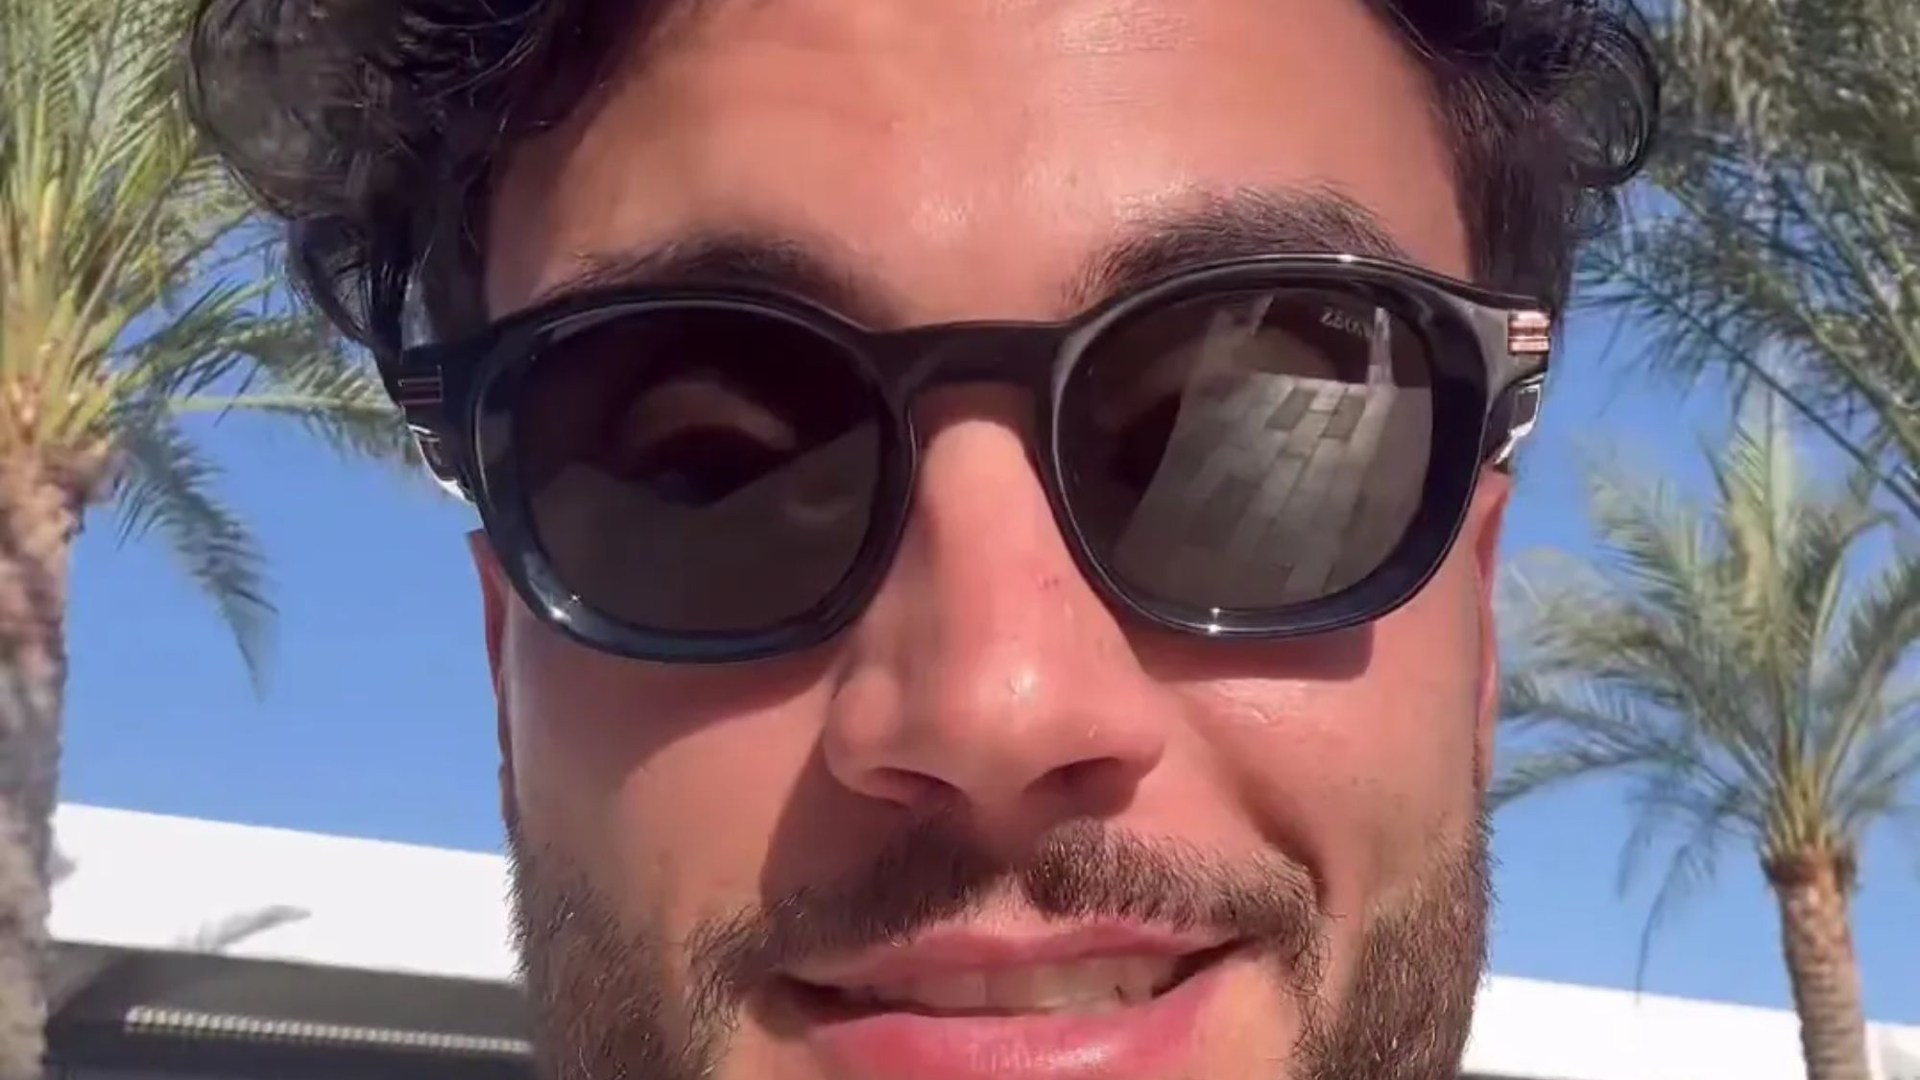 Newly-single Love Island star Davide moves on from Ekin-Su as he goes on romantic sunset sushi date with fitness model [Video]